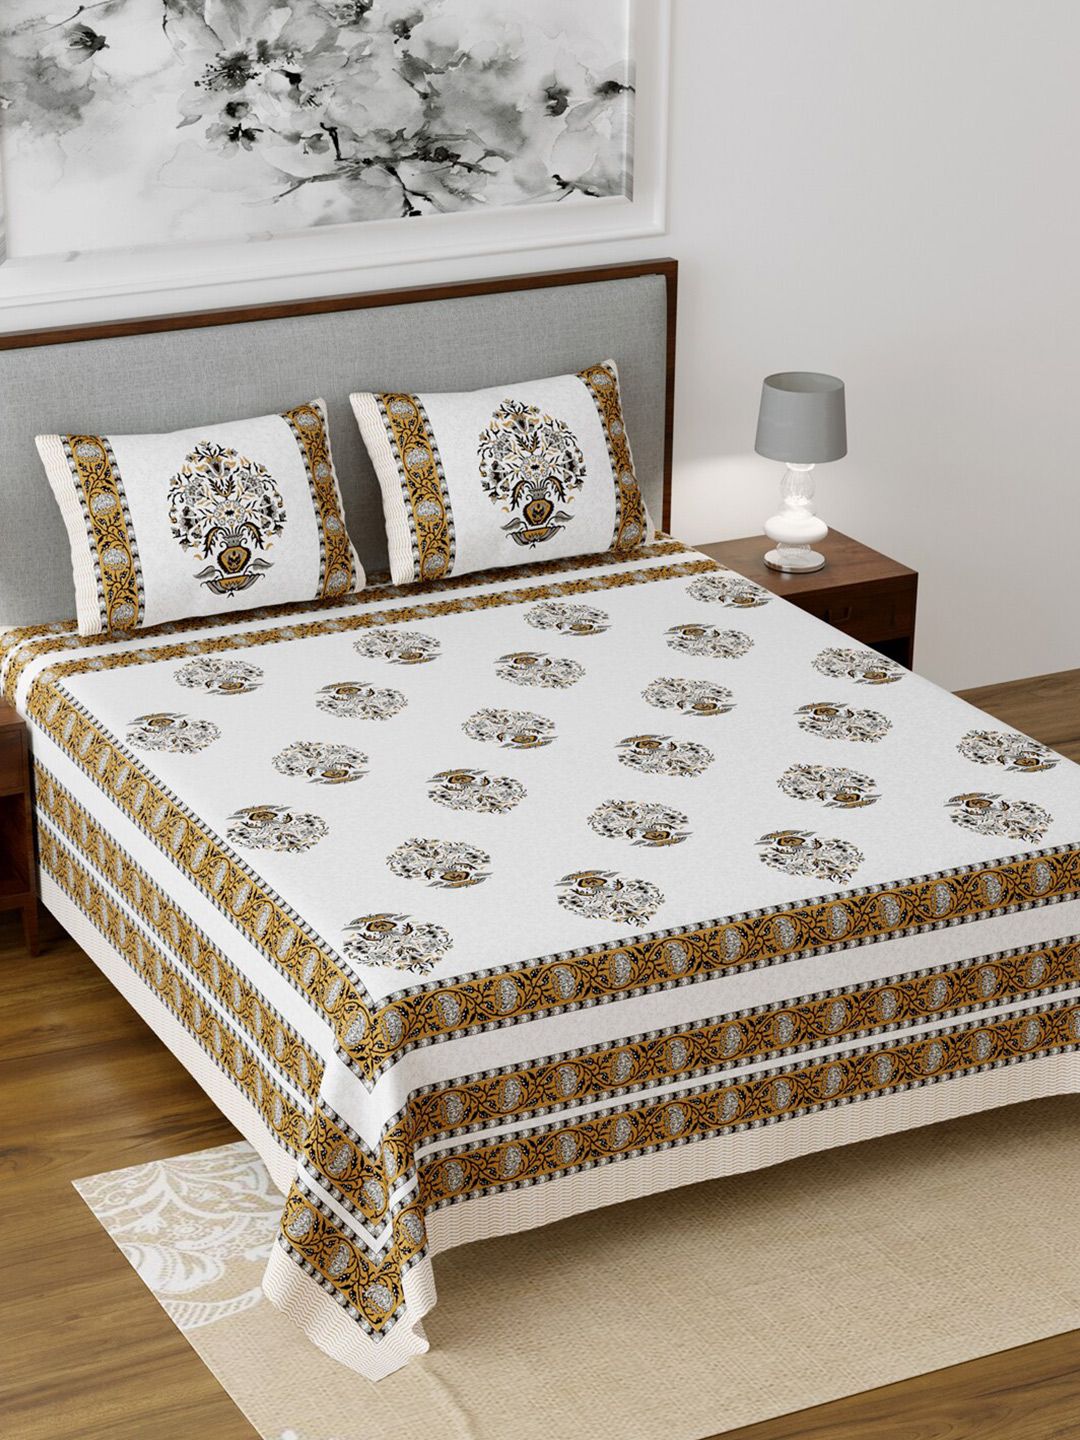 Salona Bichona White & Mustard Ethnic Motifs 120 TC Cotton King Bedsheet with 2 Pillow Covers Price in India